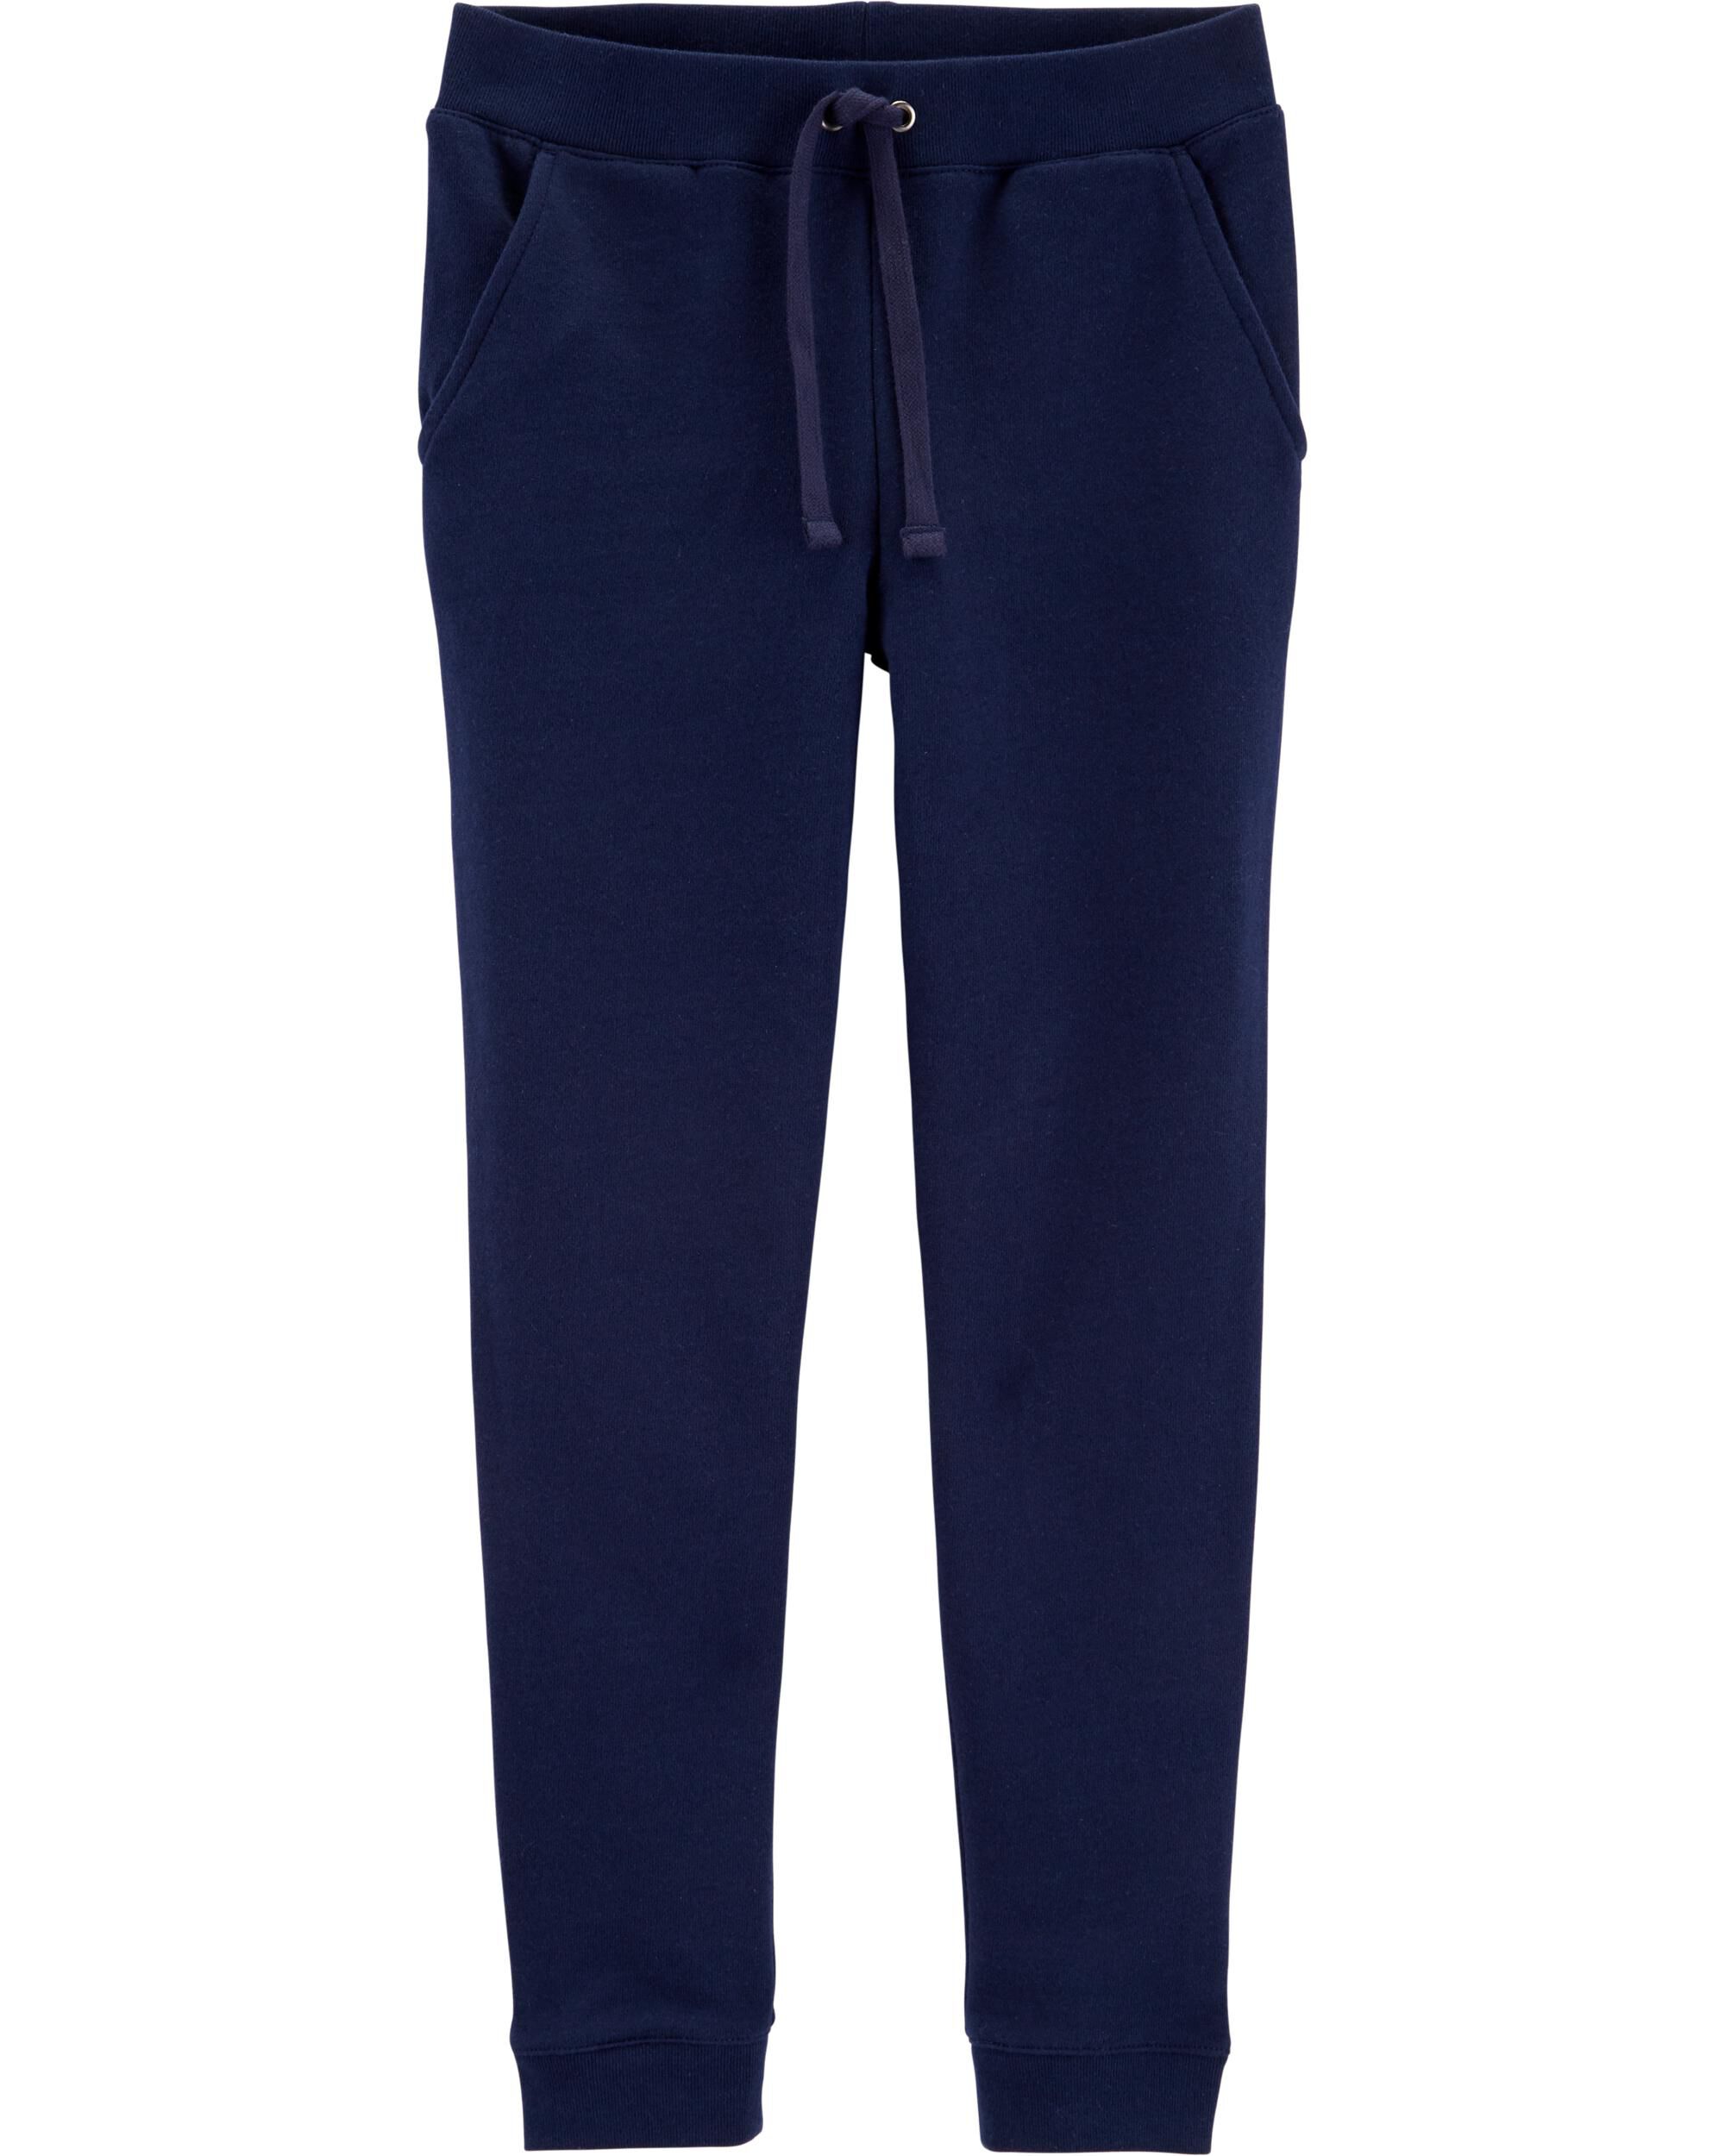  *DOORBUSTER* Pull-On French Terry Joggers 